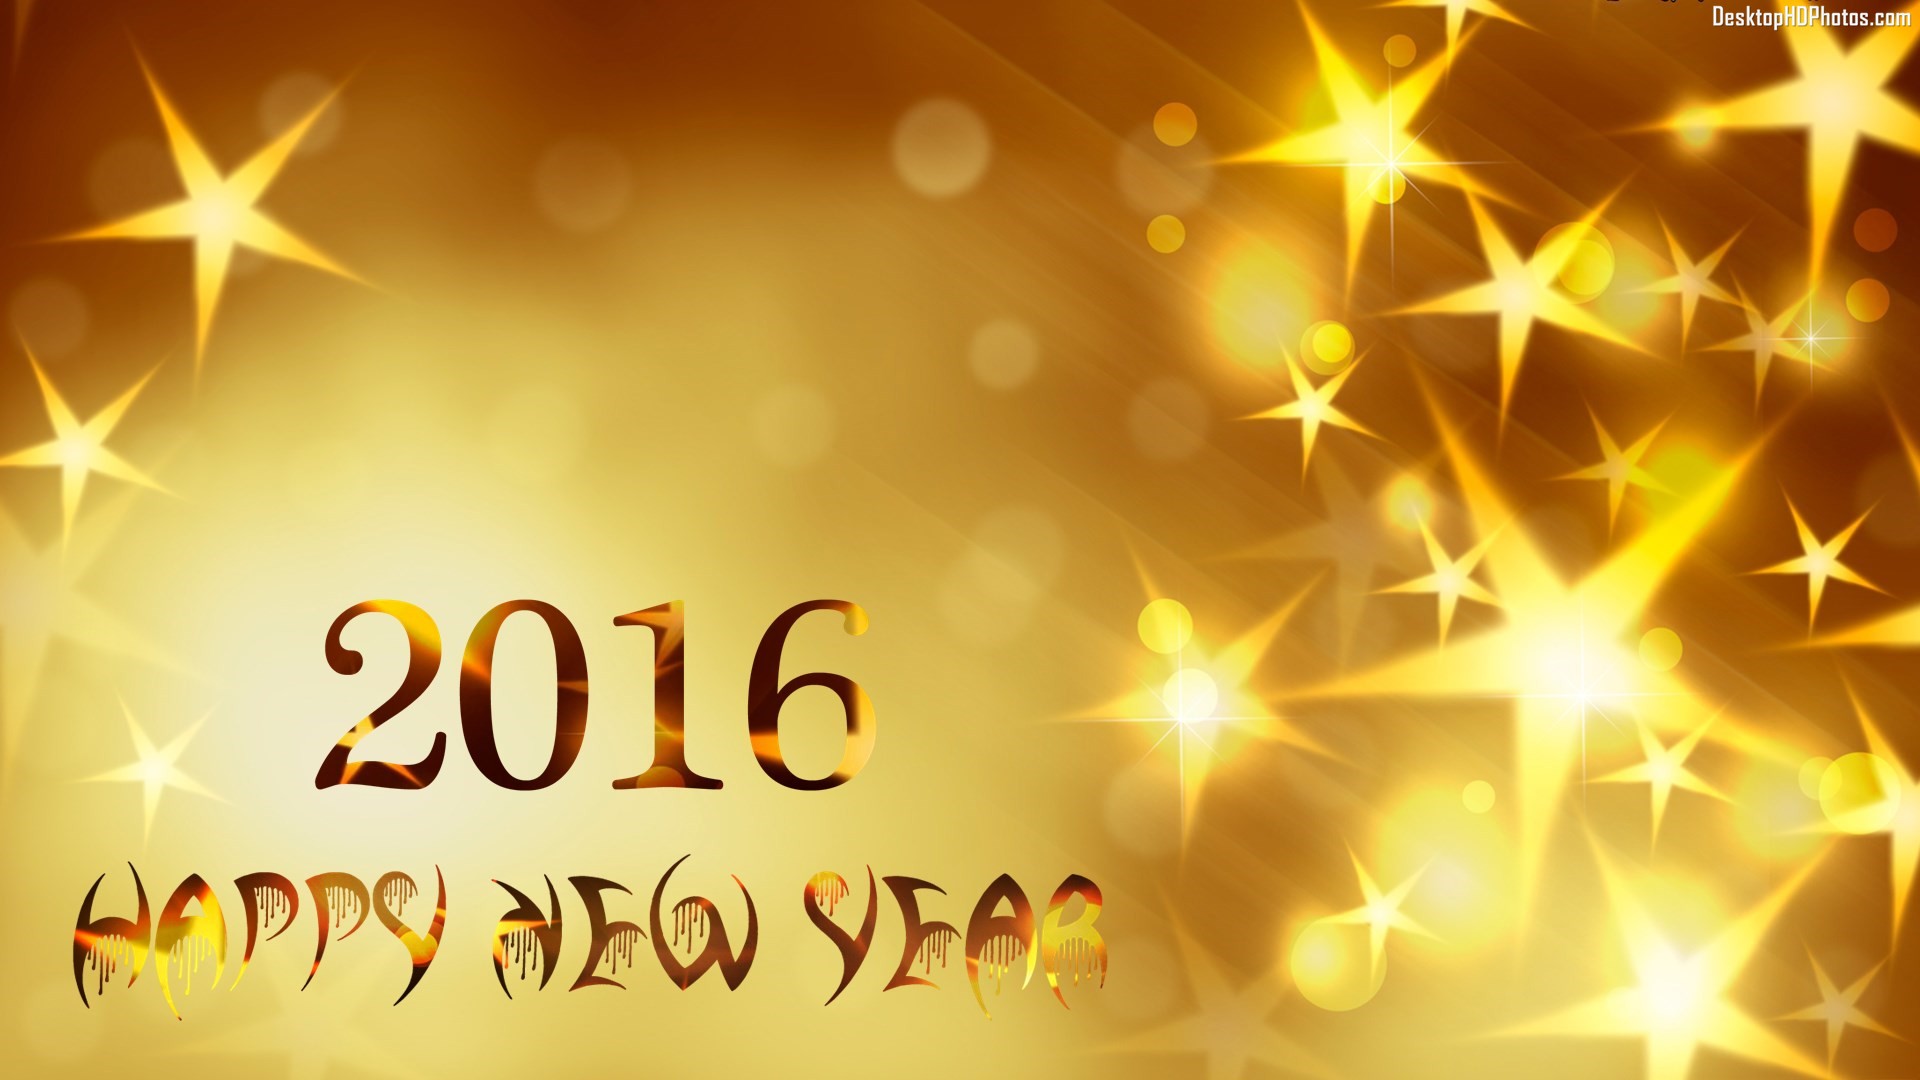 Happy New Year 2016 Wishes Picture For Facebook